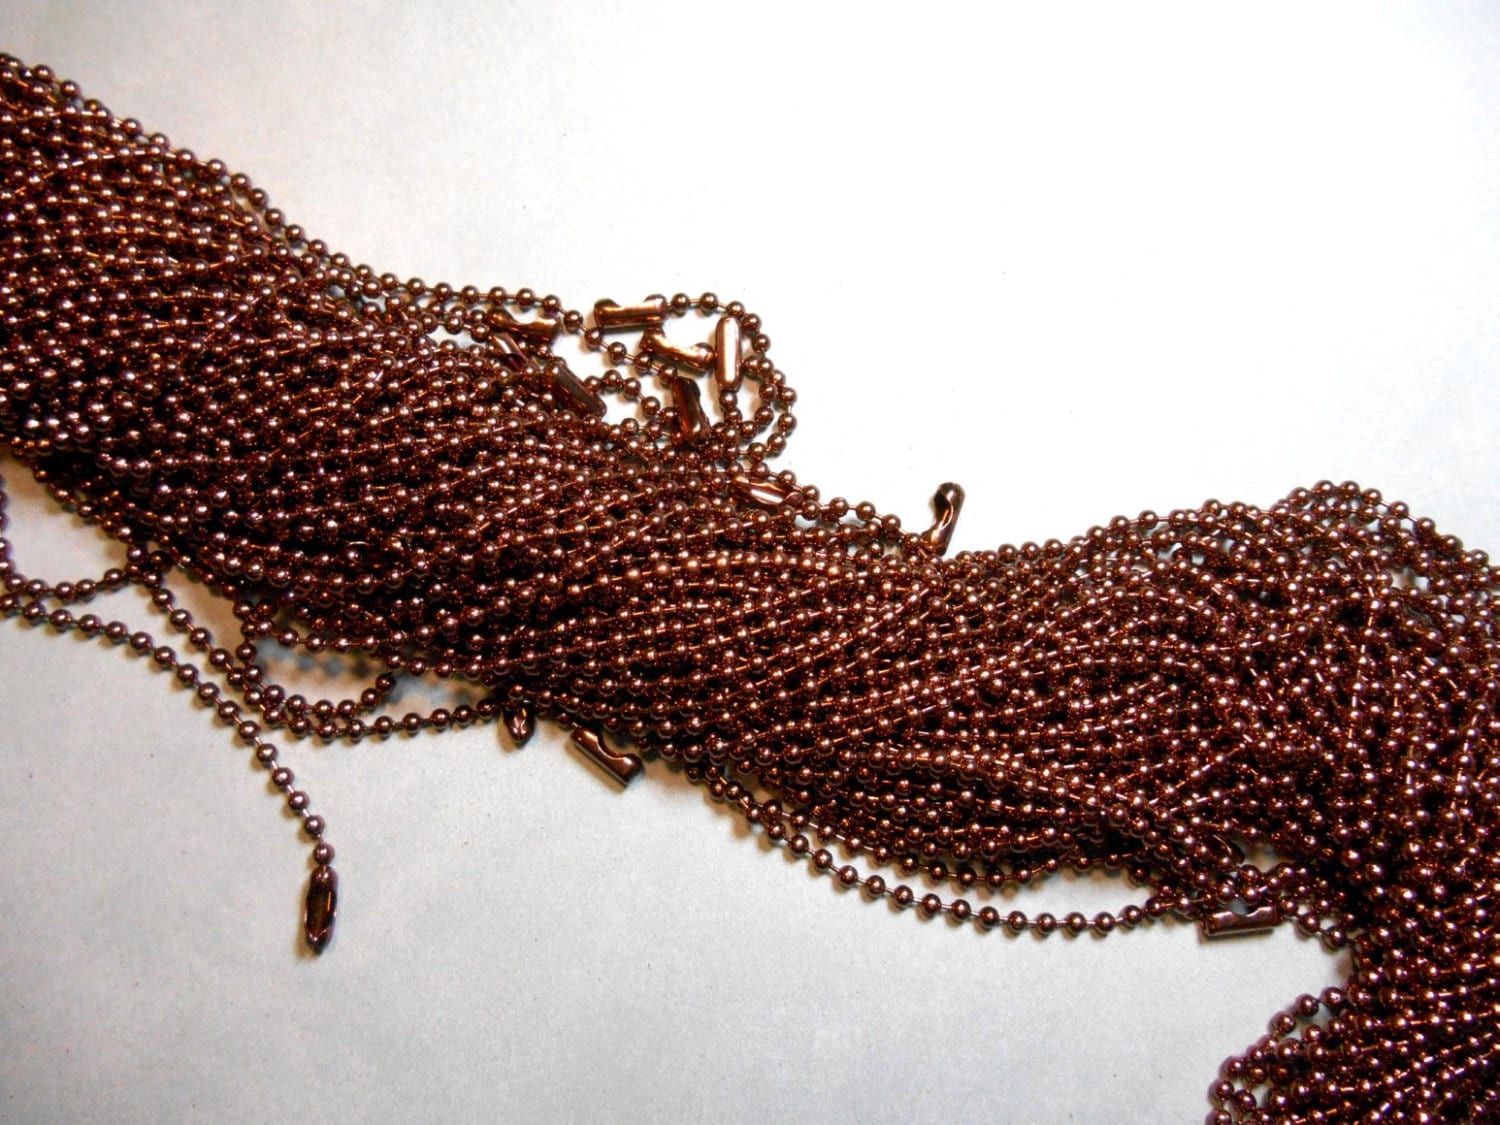 Chocolate Brown Ball Chain Necklaces - 24 inch - 2.4mm Diameter - Set of 25